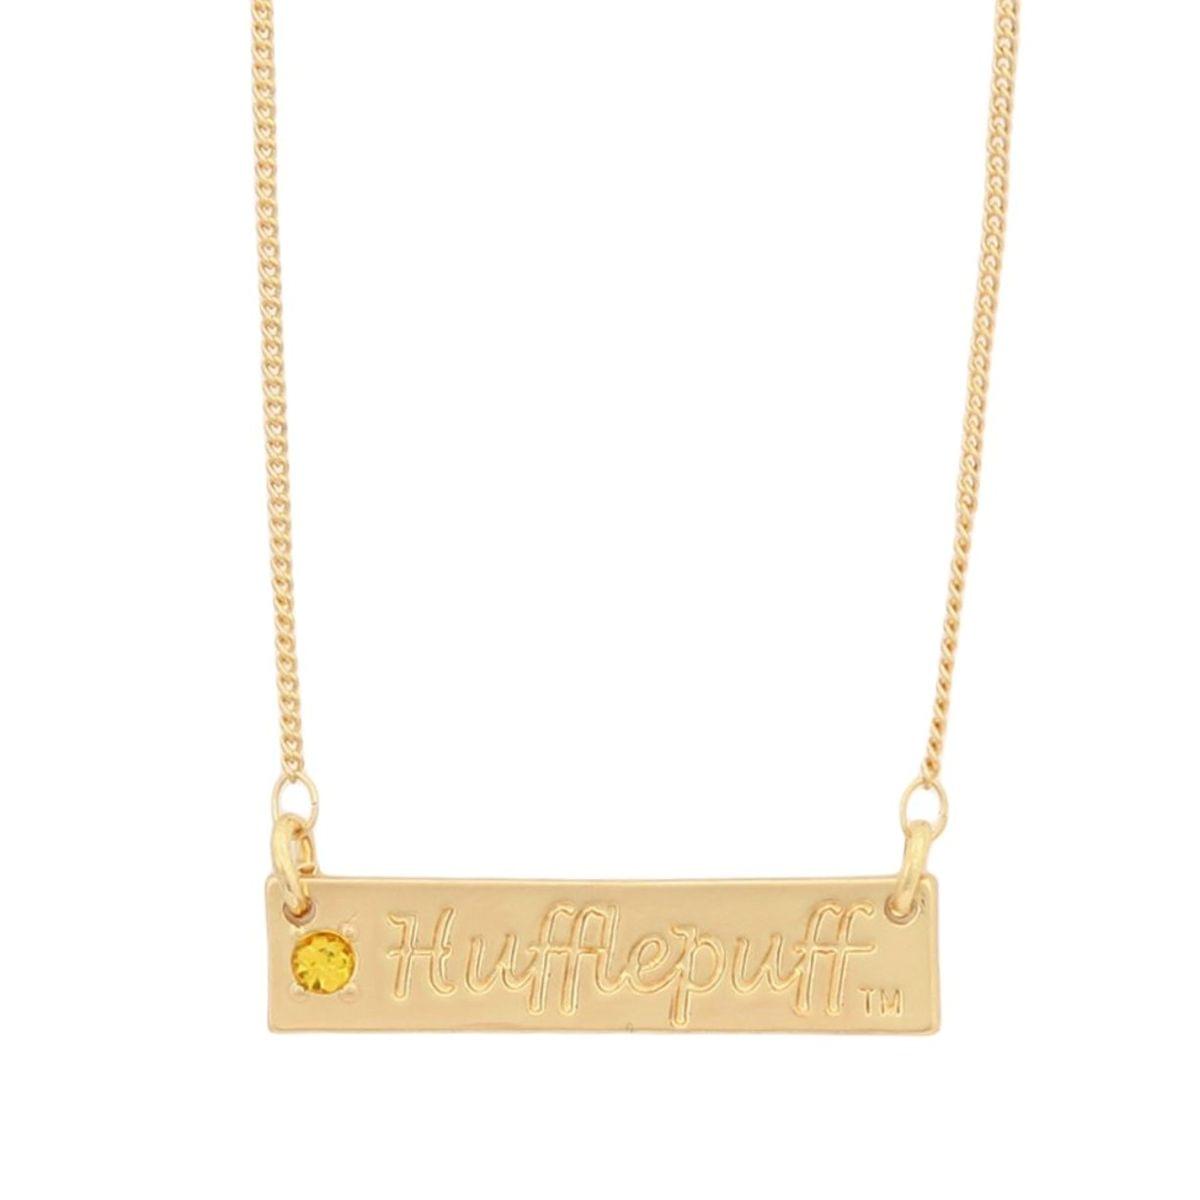 Harry Potter Hufflepuff Script Bar Necklace with Stone